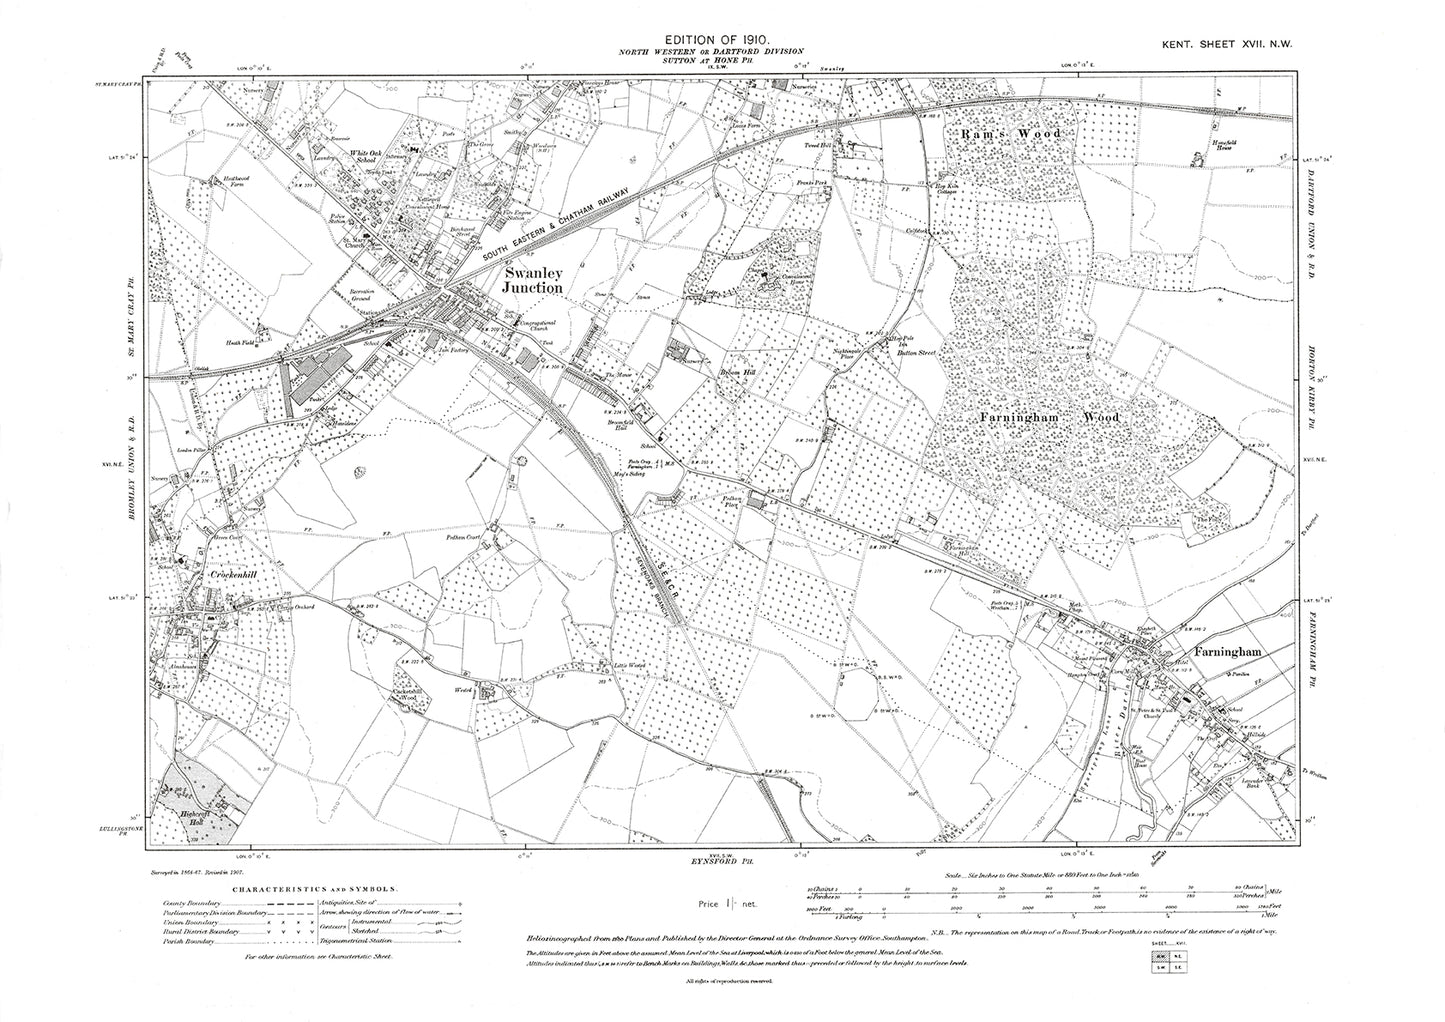 Farningham, Swanley Junction, old map Kent 1909: 17NW